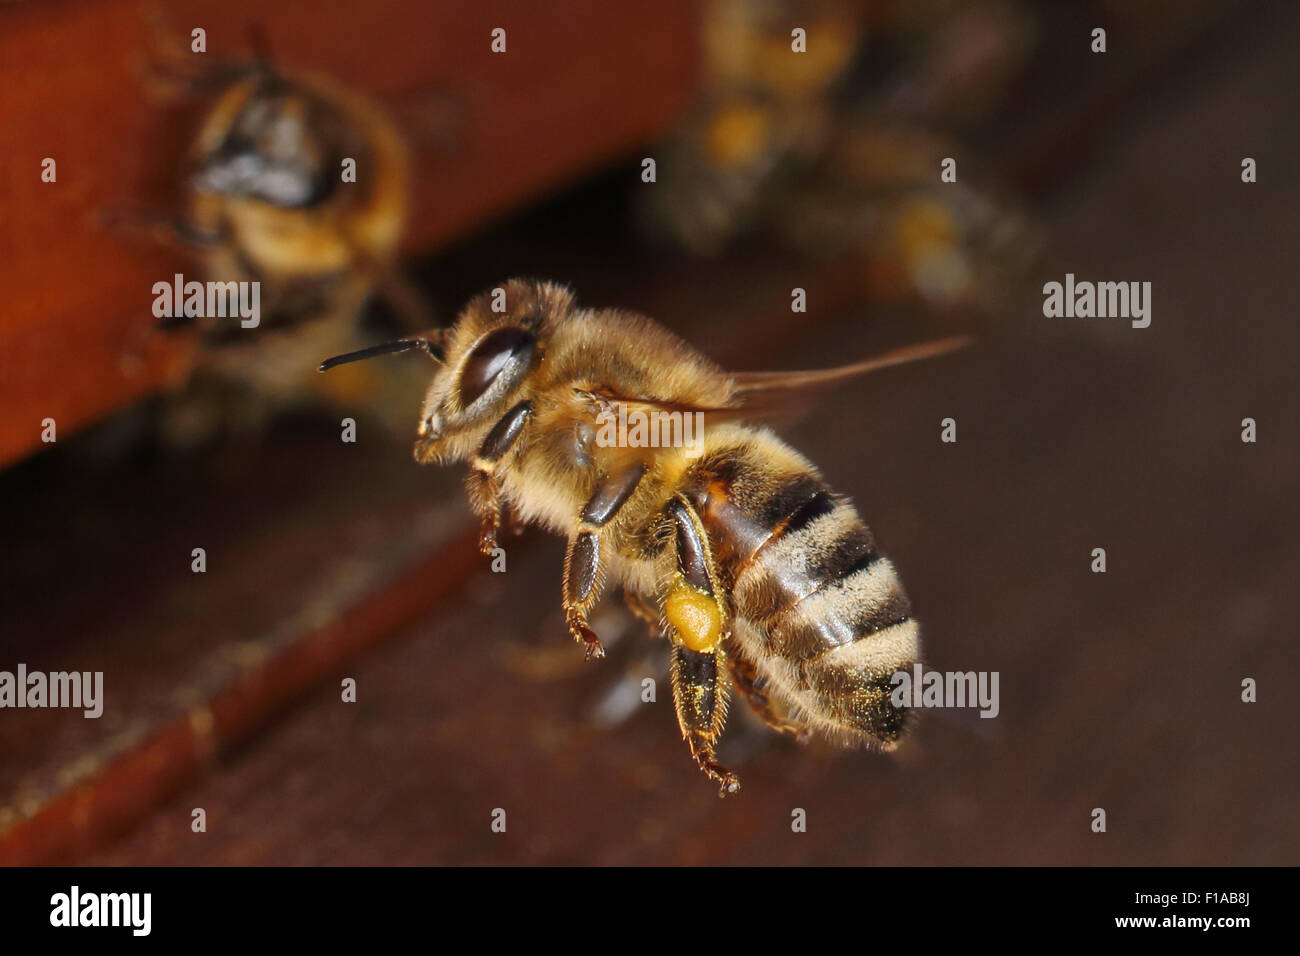 Berlin, Germany, honeybee with pollen on leg approaching their hive Stock Photo